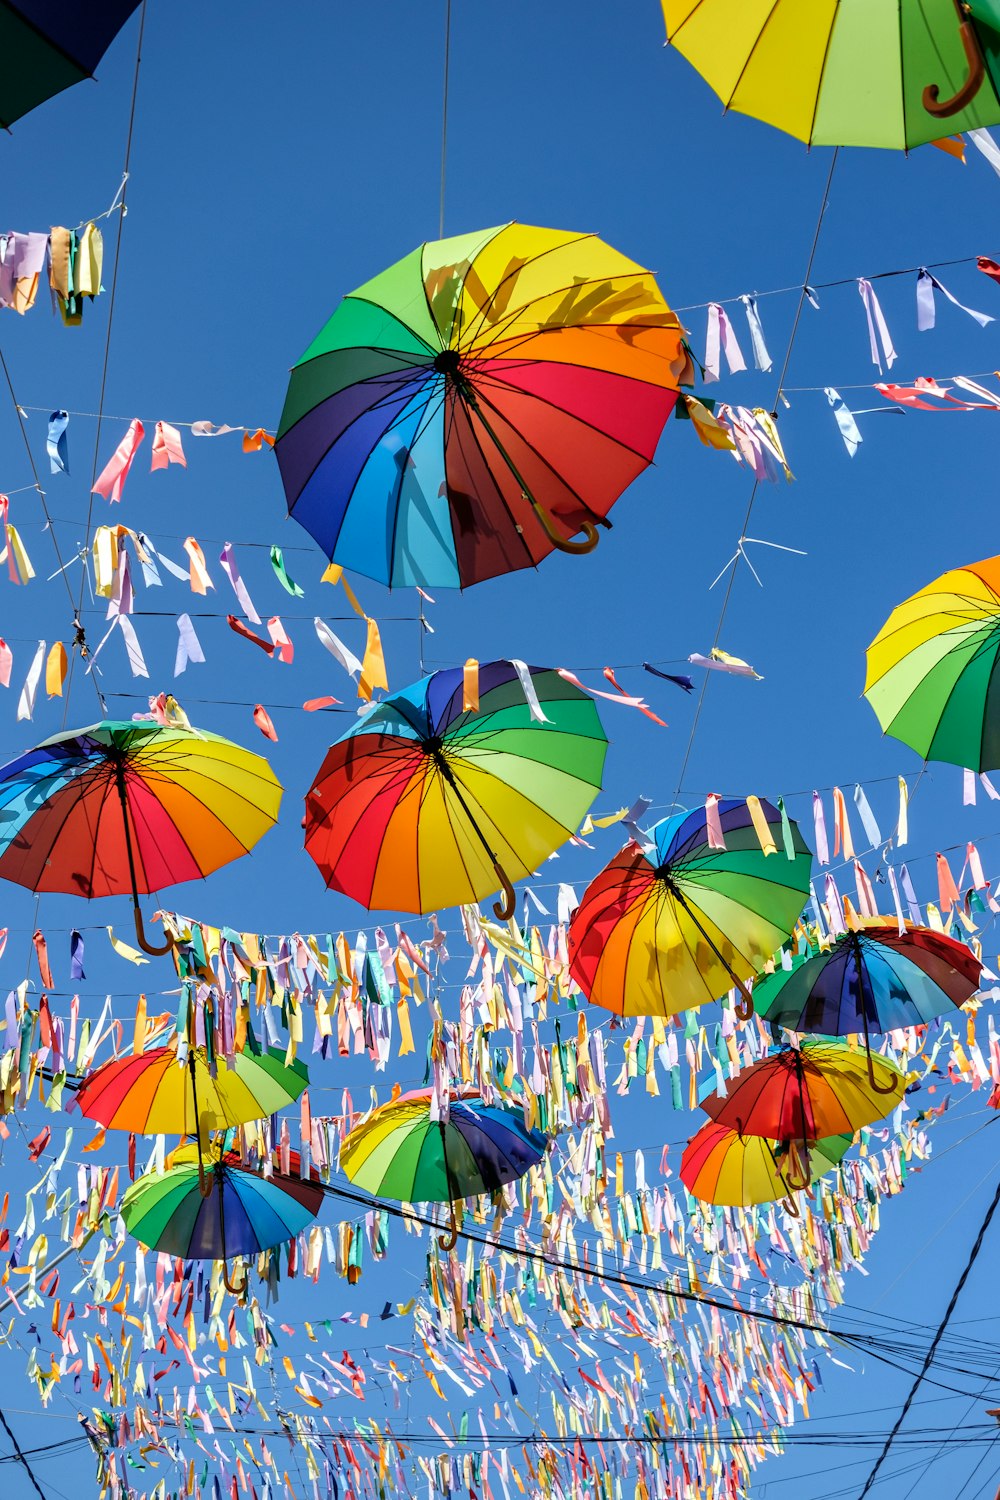 a bunch of colorful umbrellas hanging in the air